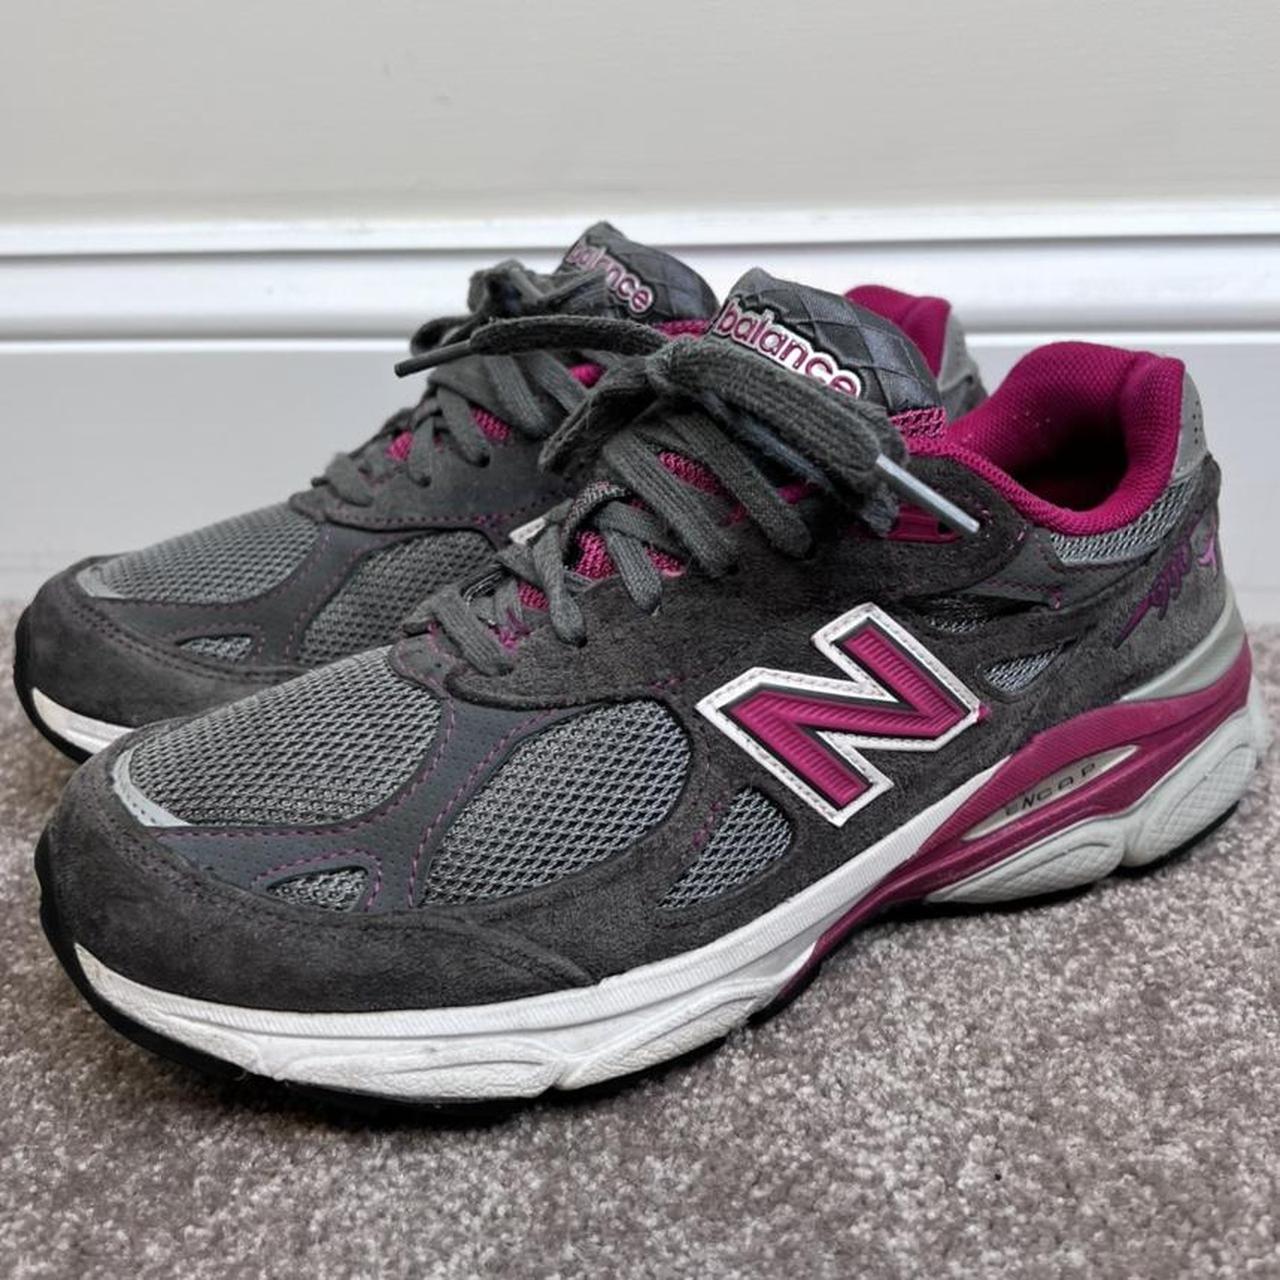 Product Image 1 - New Balance 990 sneakers

Women's size